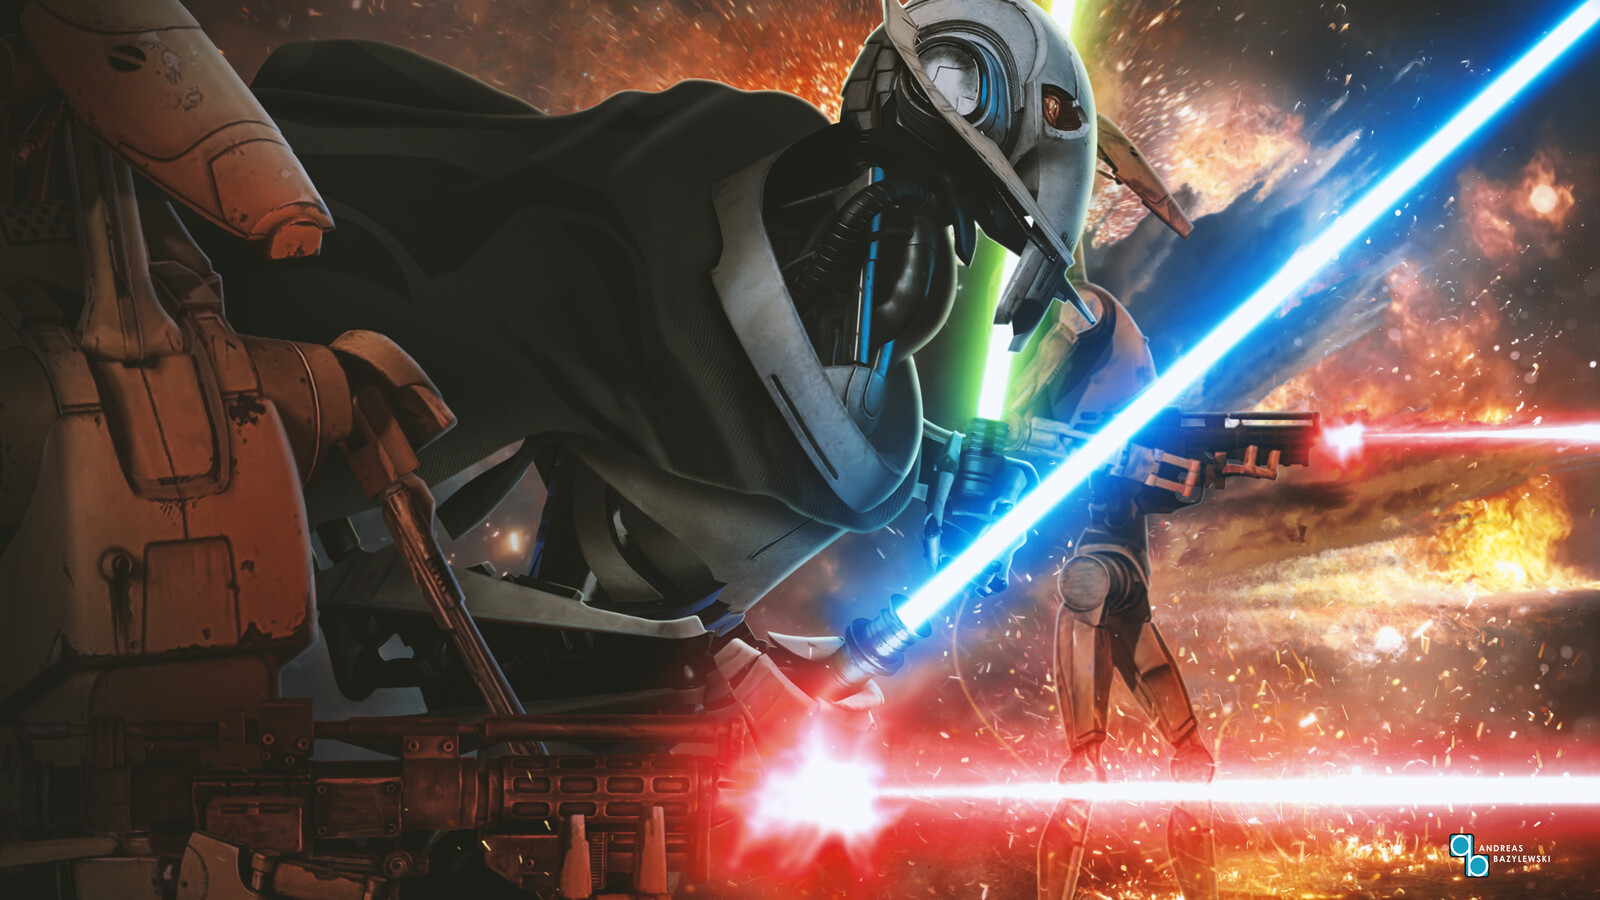 Star Wars: The Clone Wars - General Grievous &amp; the Droid Army